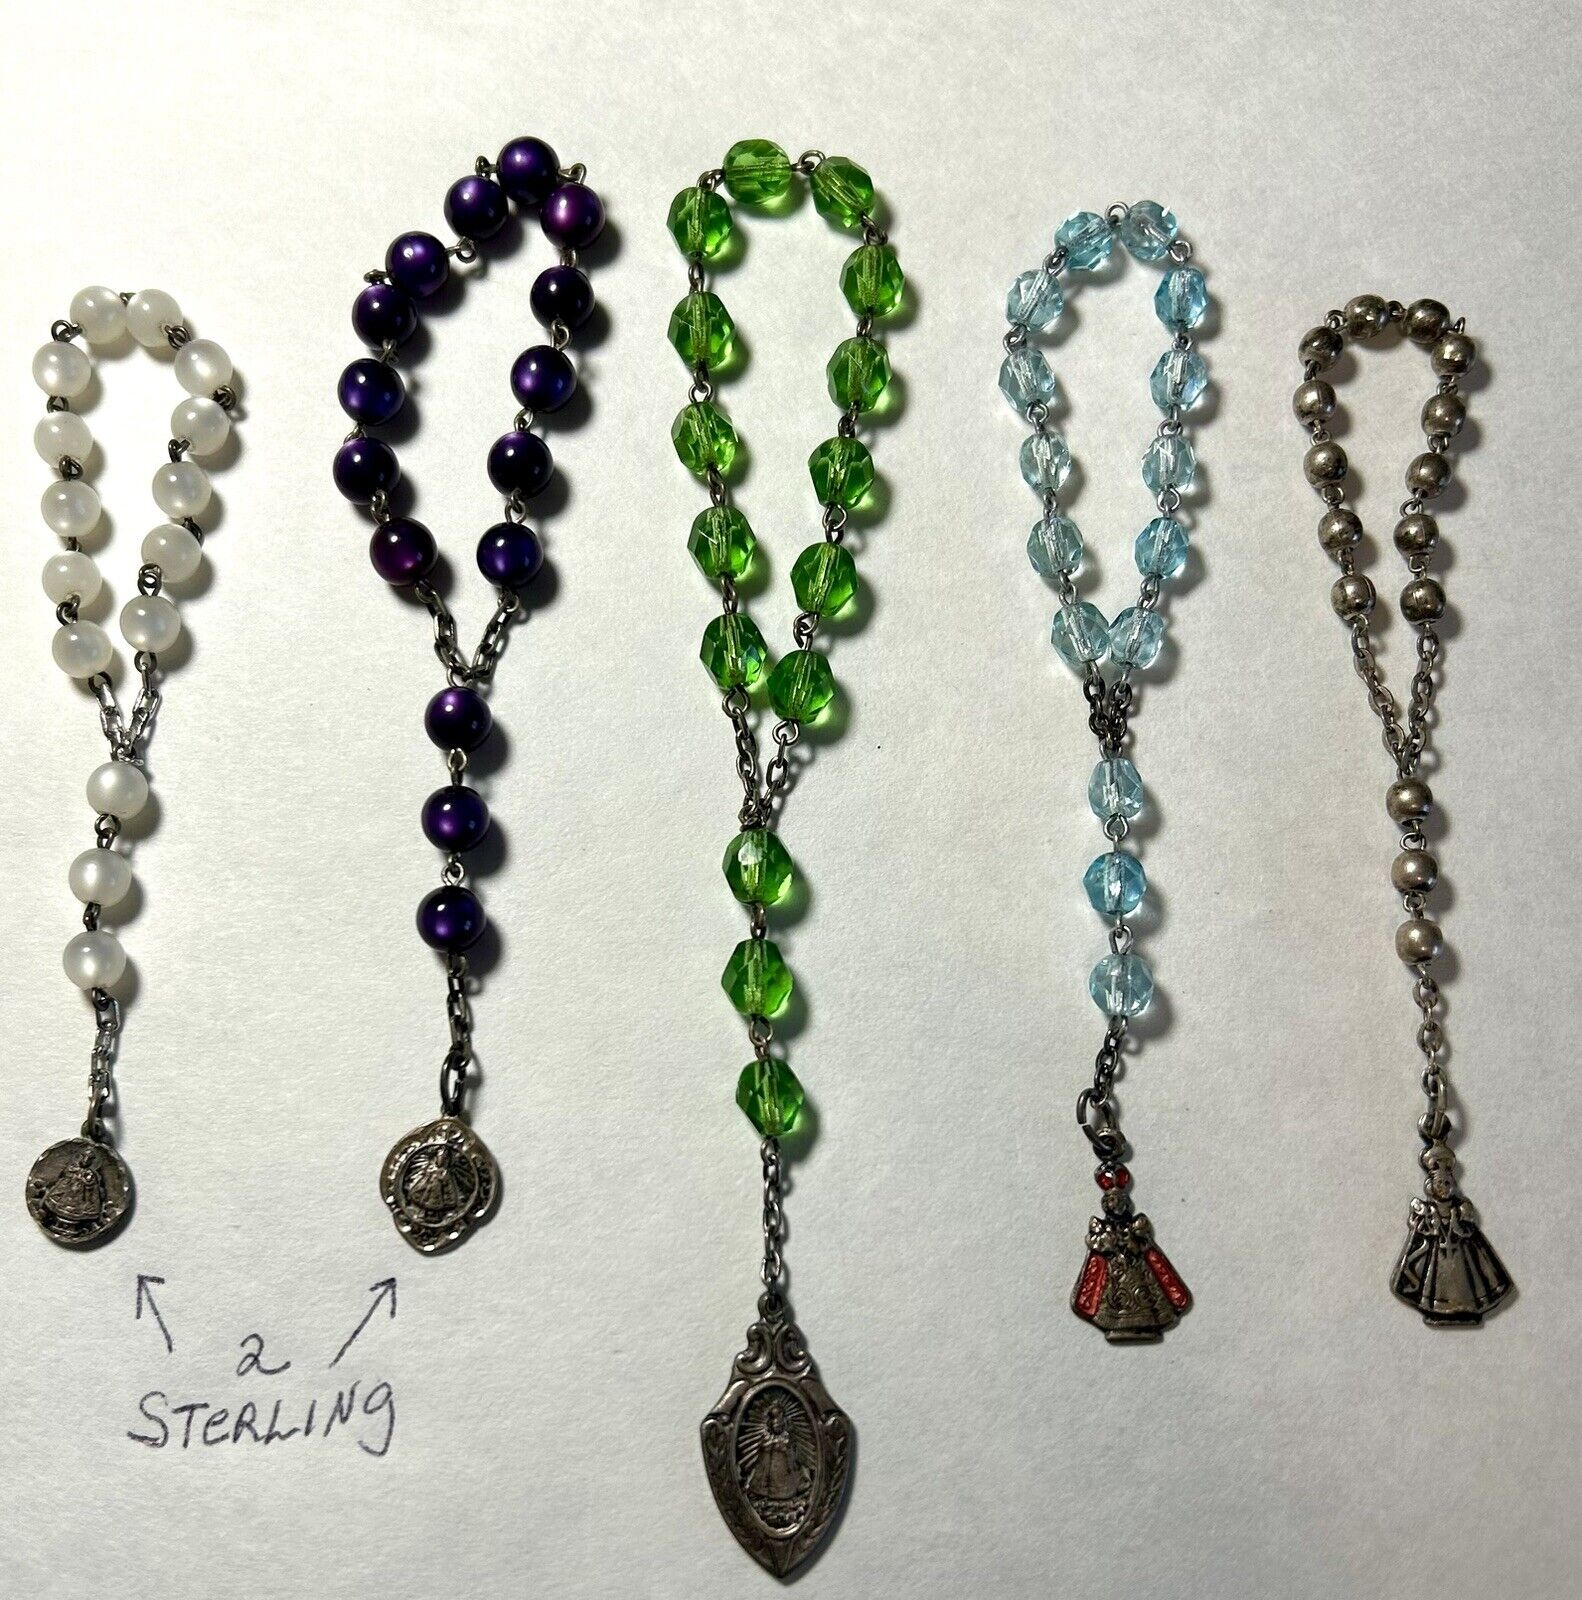 Lot Of 5 Chaplets 2-Sterling, Rosary Italy Prague Sacred Heart Catholic Vintage